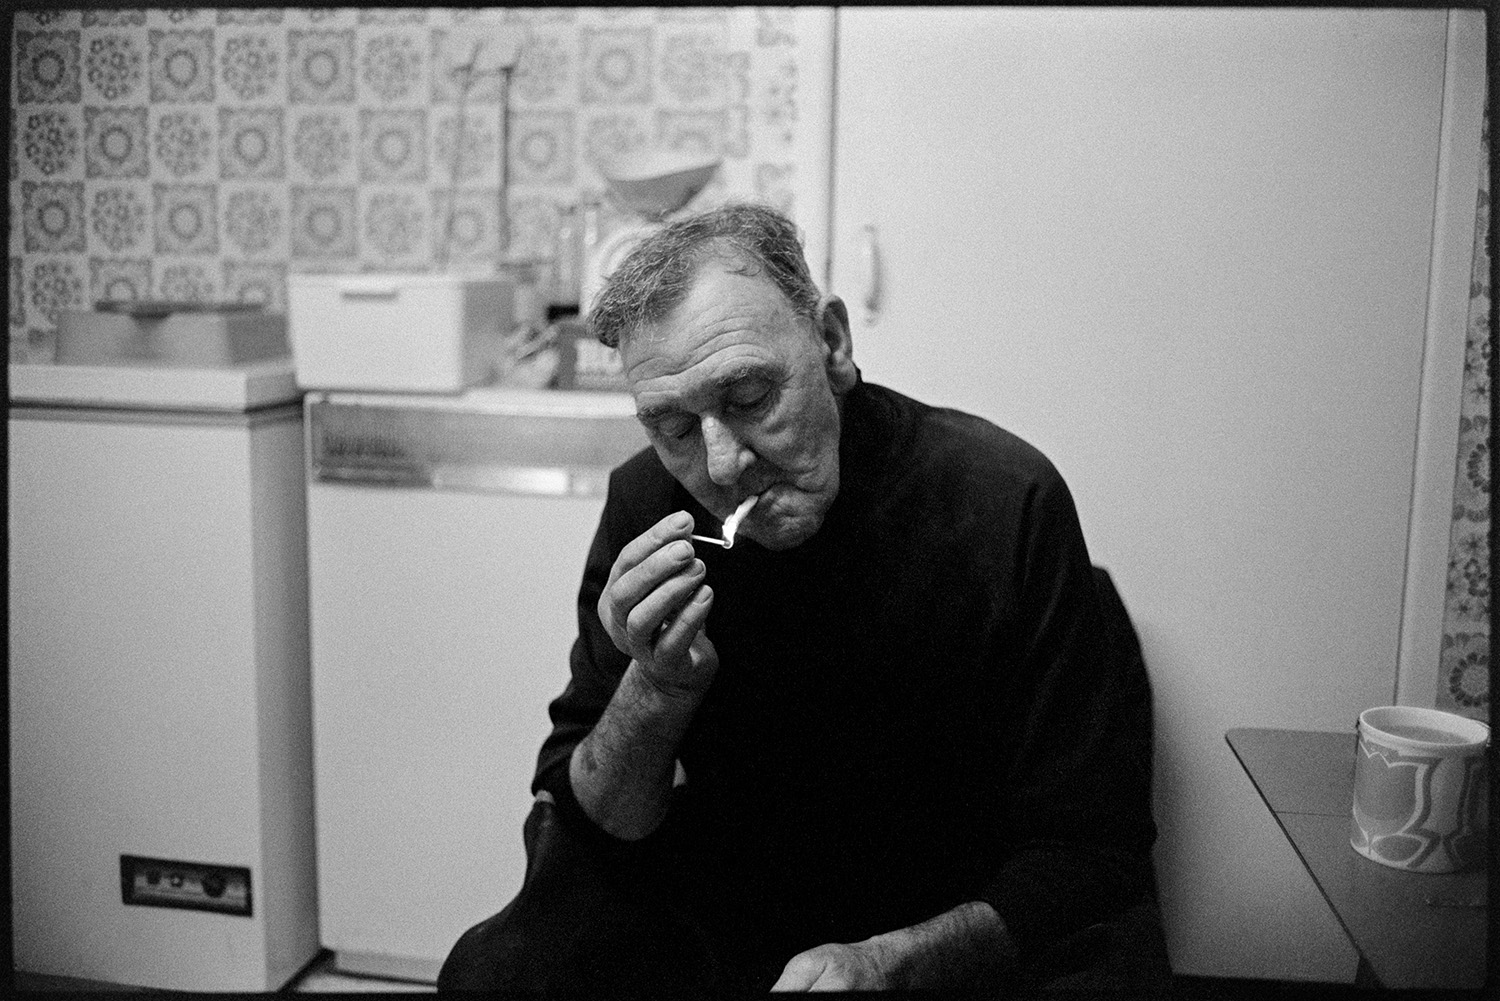 Couple preparing laver in kitchen. 
[Tim Schiller sat in his kitchen lighting a cigarette with a match. A fridge or freezer can be seen in the background and a cup of tea is on the table next to him.]